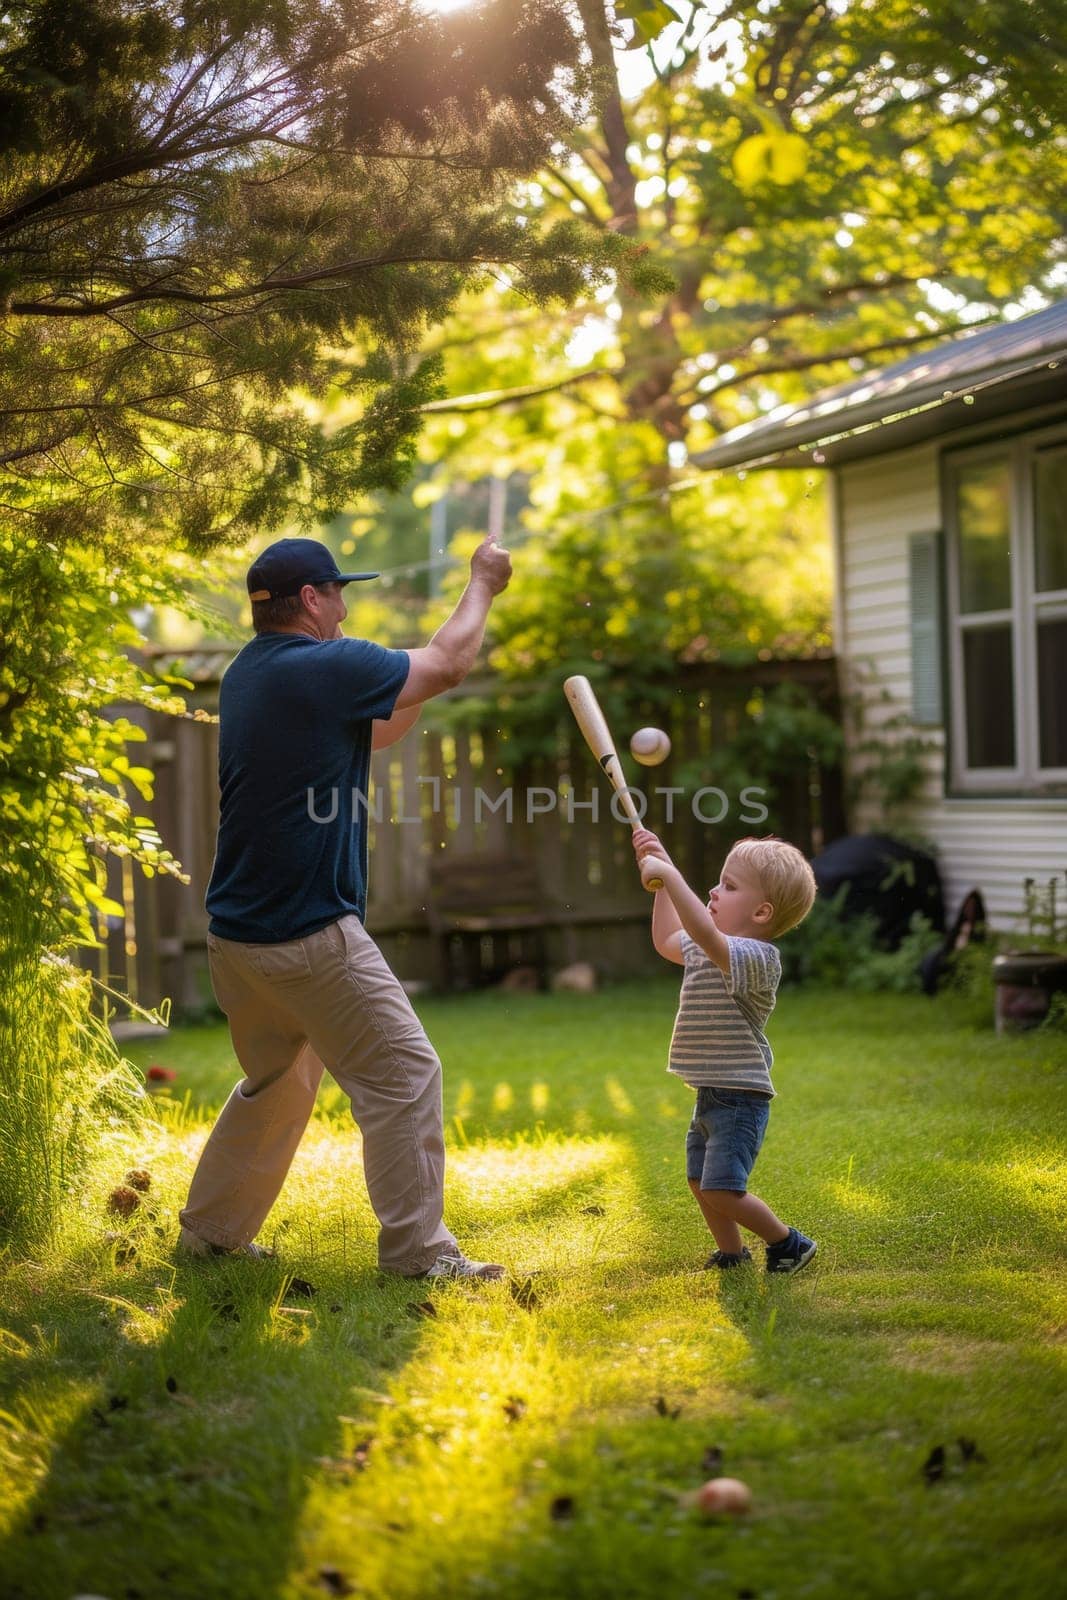 Man and child playing baseball in a backyard at sunset, with the sun casting long shadows. by sfinks